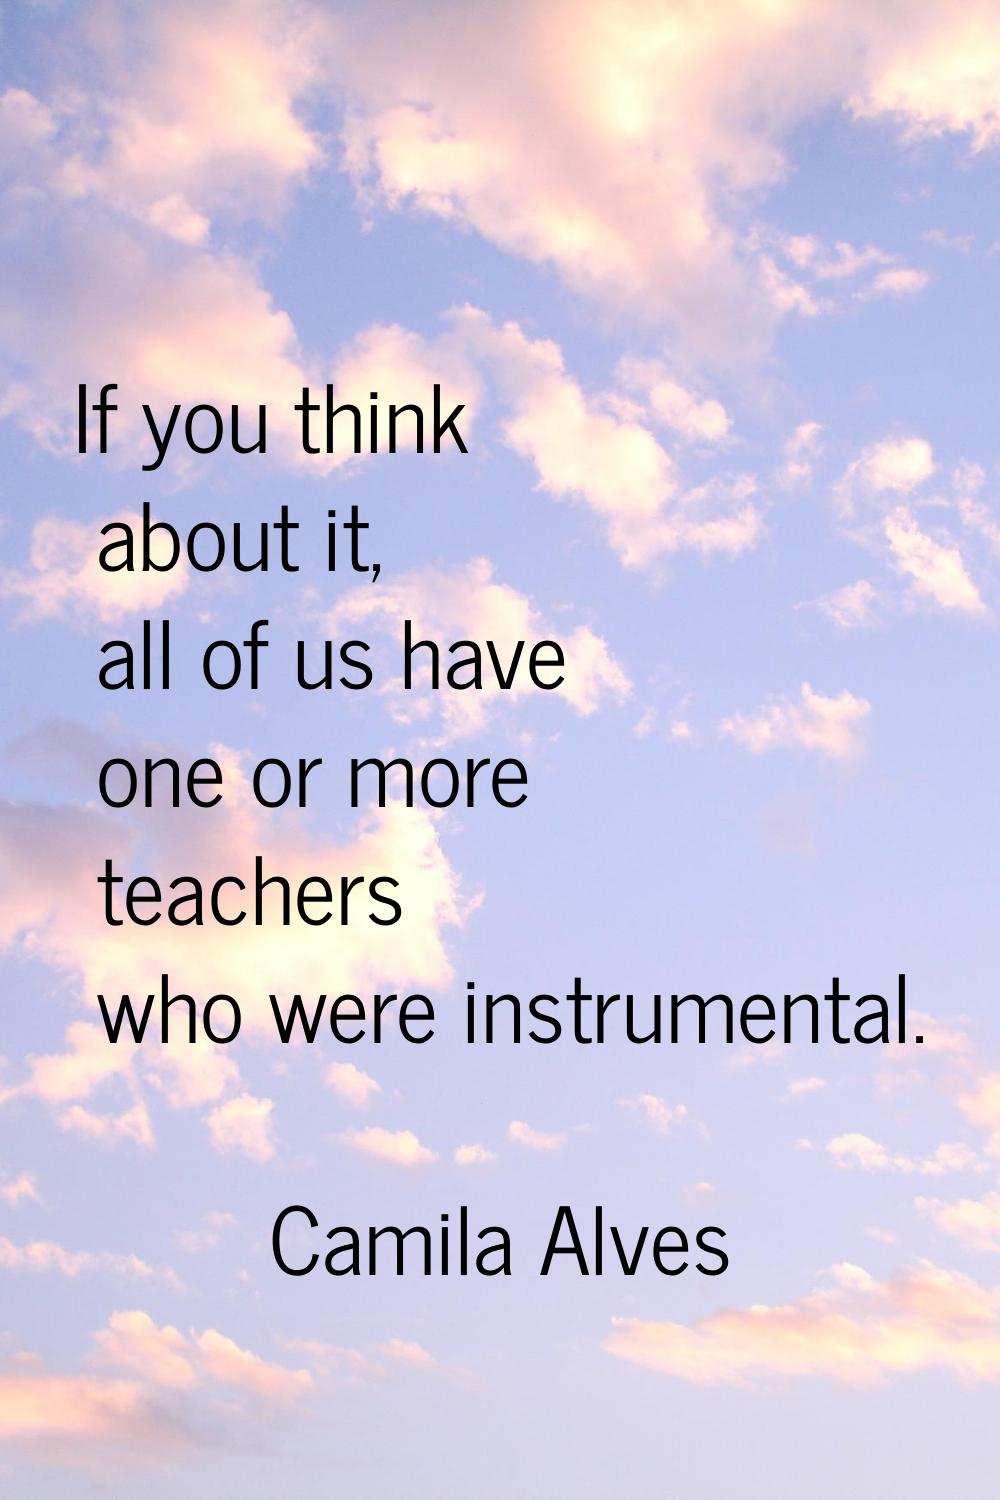 If you think about it, all of us have one or more teachers who were instrumental.